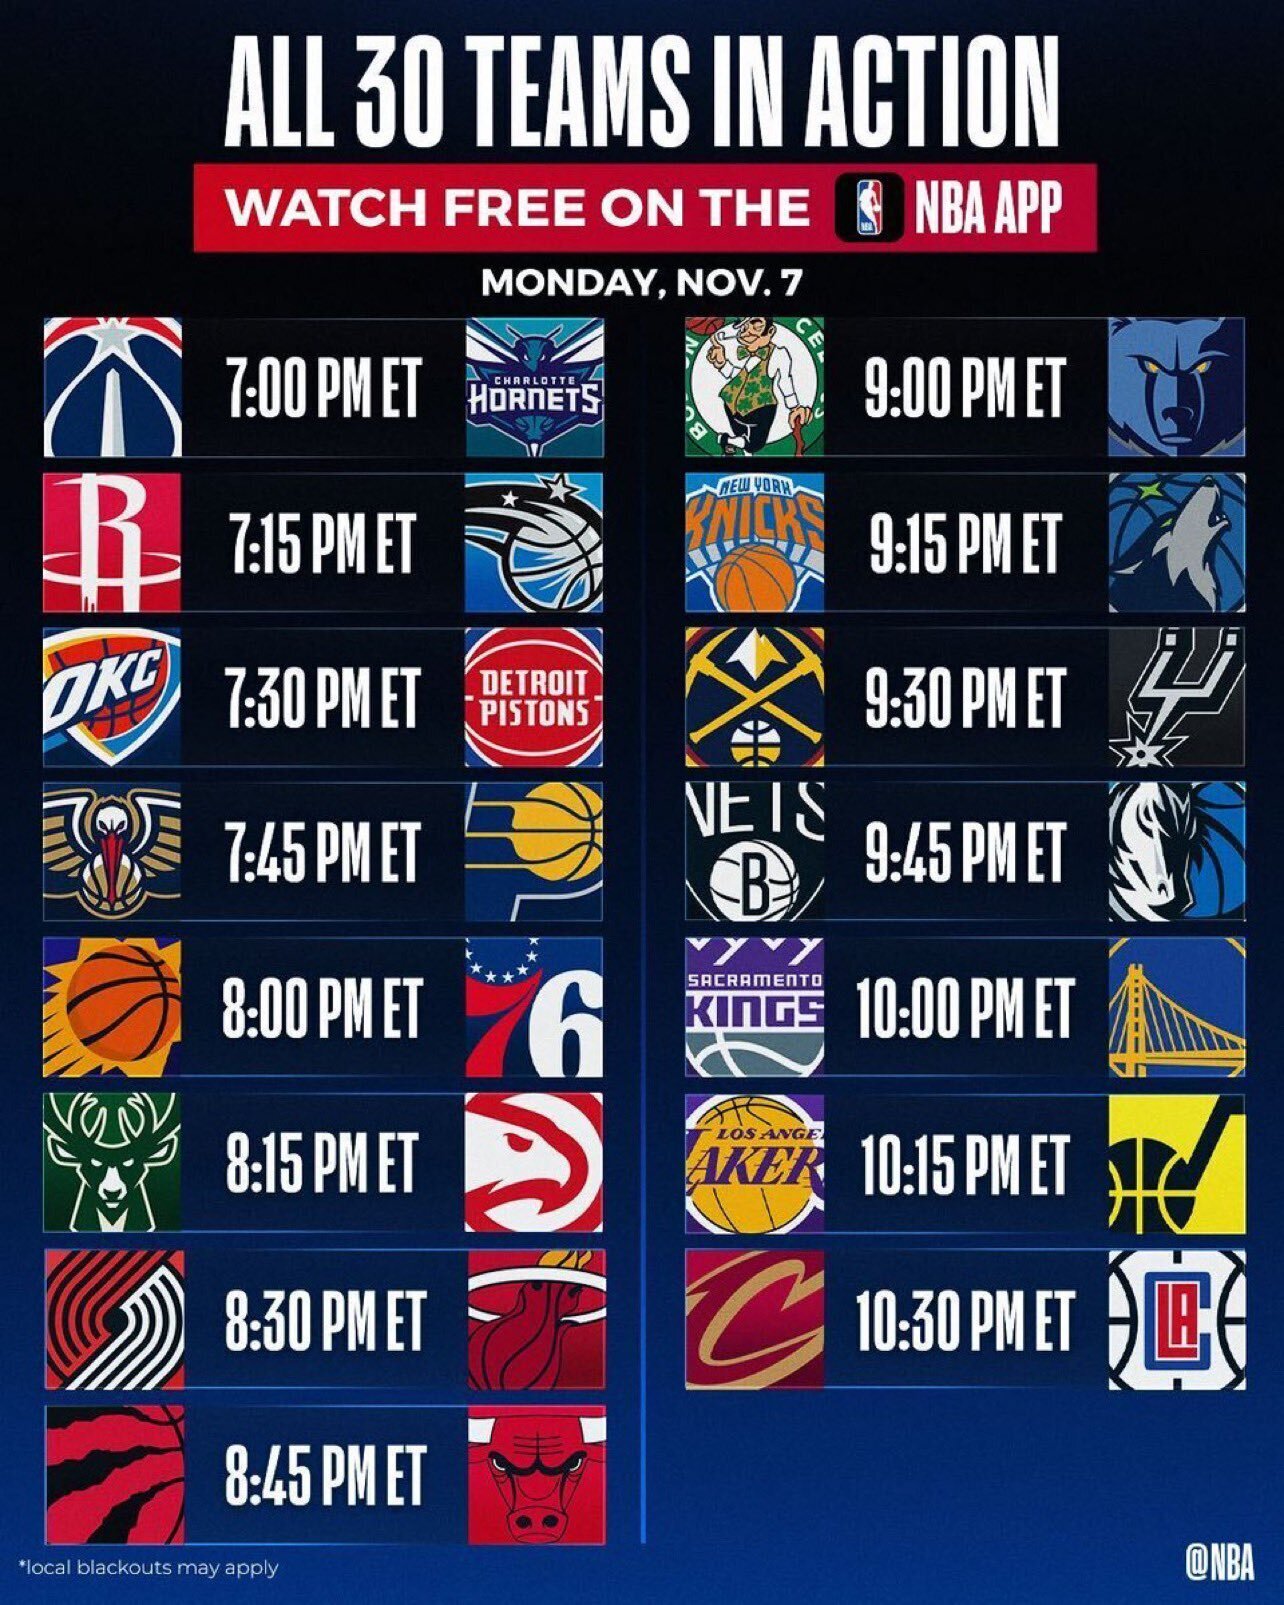 NBA CrunchTime: Full schedule and how to watch free with the NBA